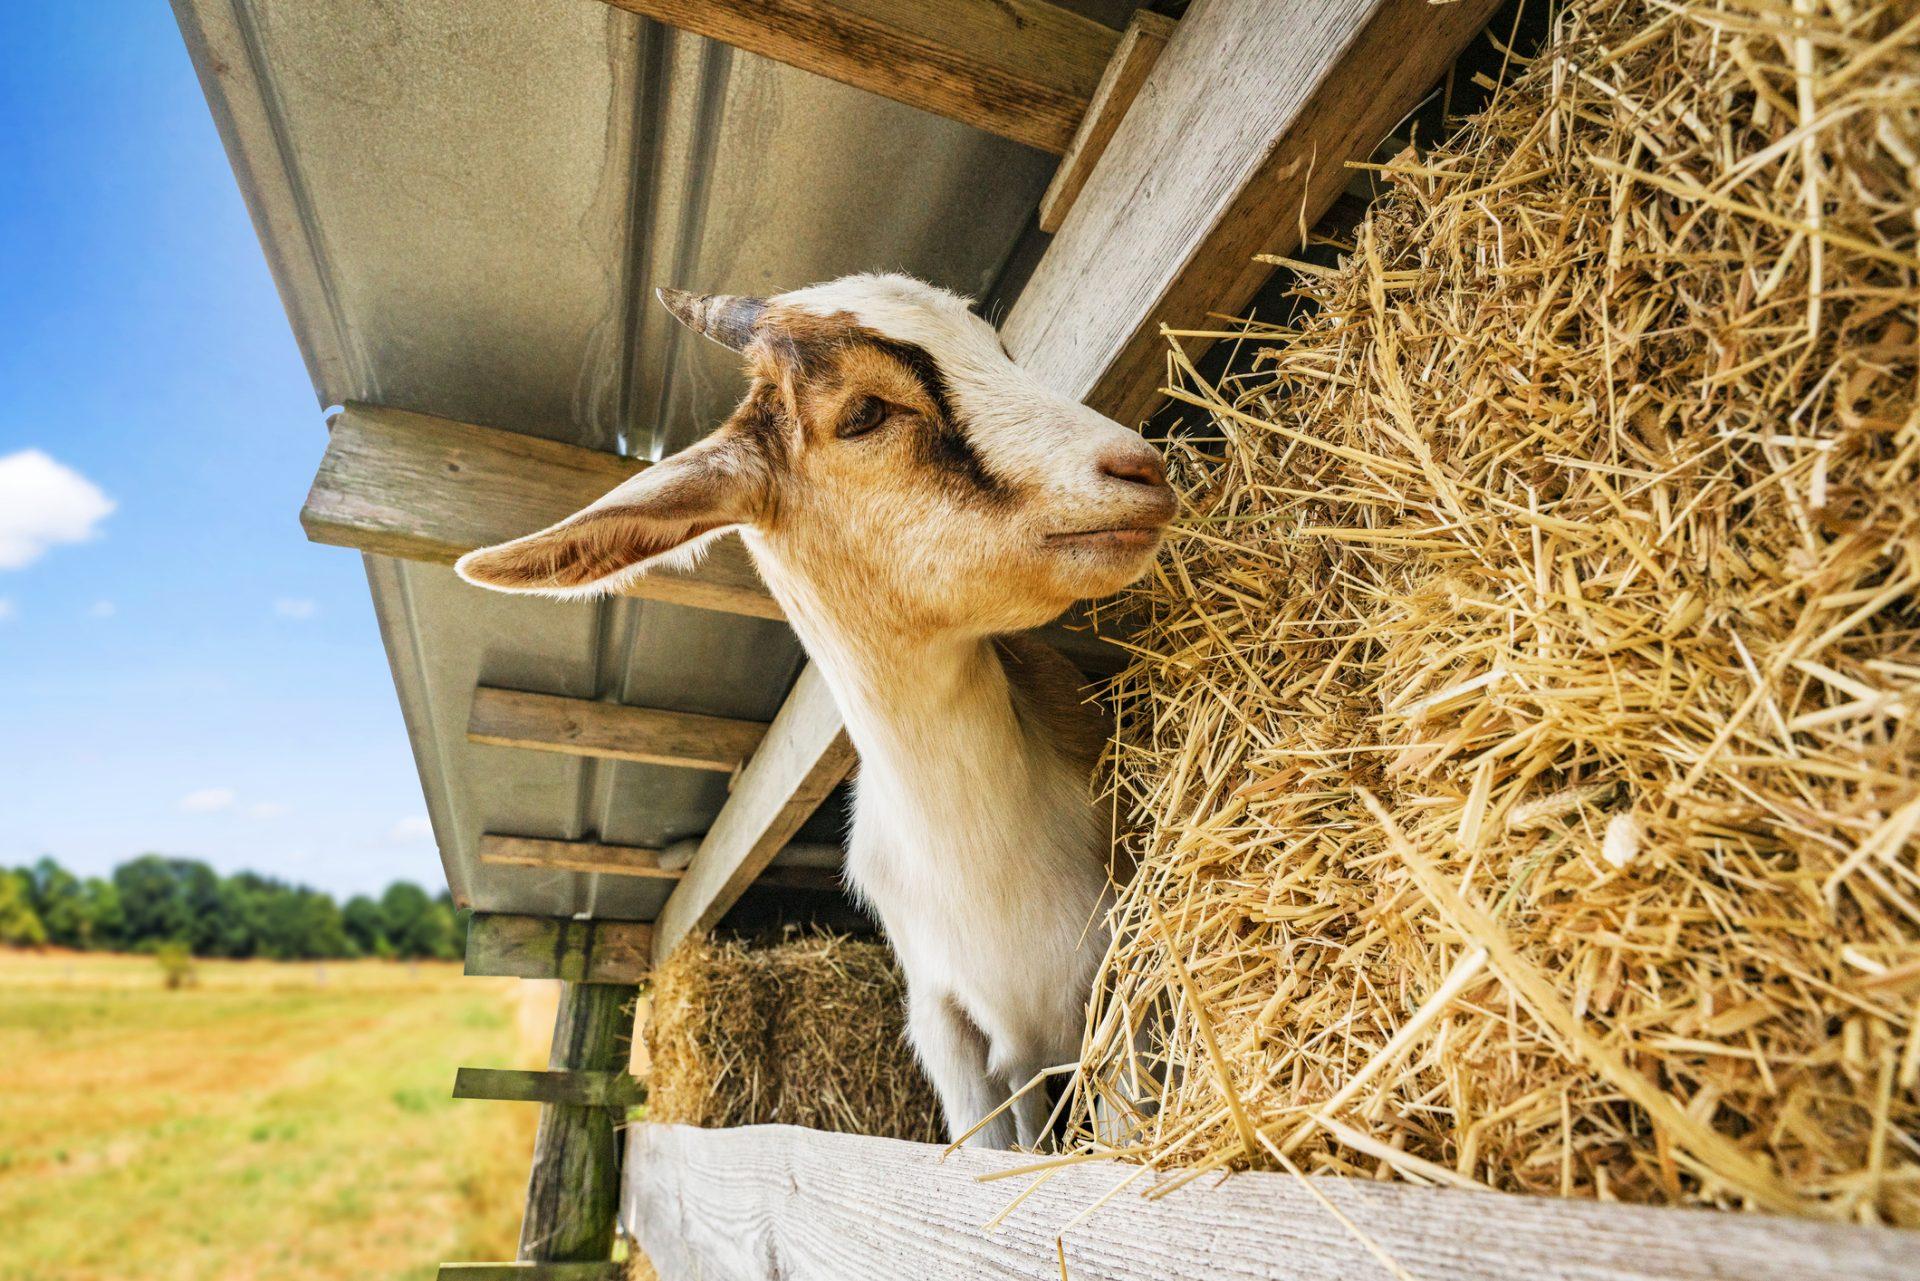 goat eating hay at a barn in a rural environment in the summer